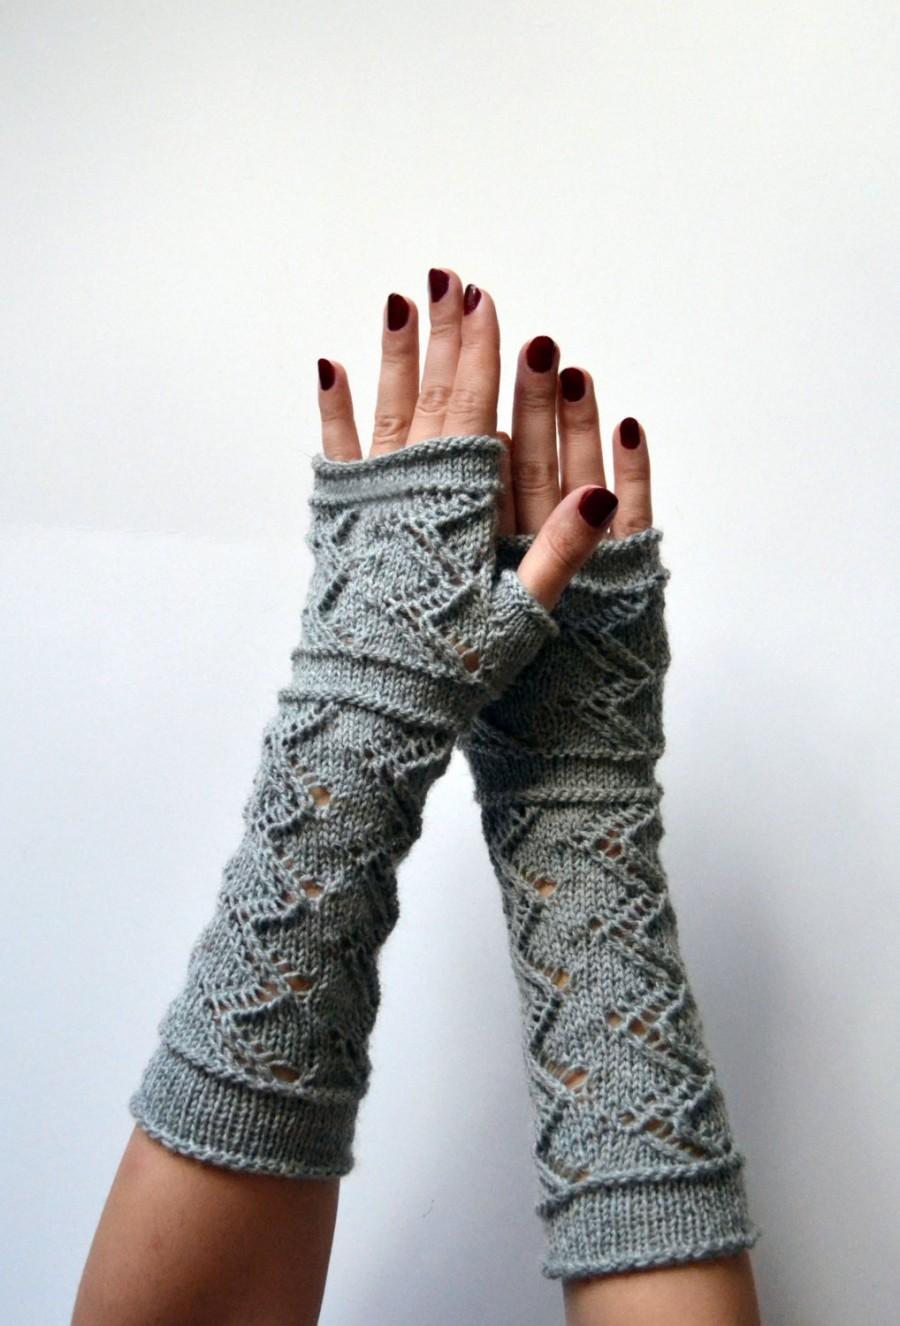 Wedding - Gray Lace Knit Fingerless Gloves - Lace Fingerless Gloves - Winter Gloves - Gray Lace Gloves - Luxurious Christmas Gift nO 101.